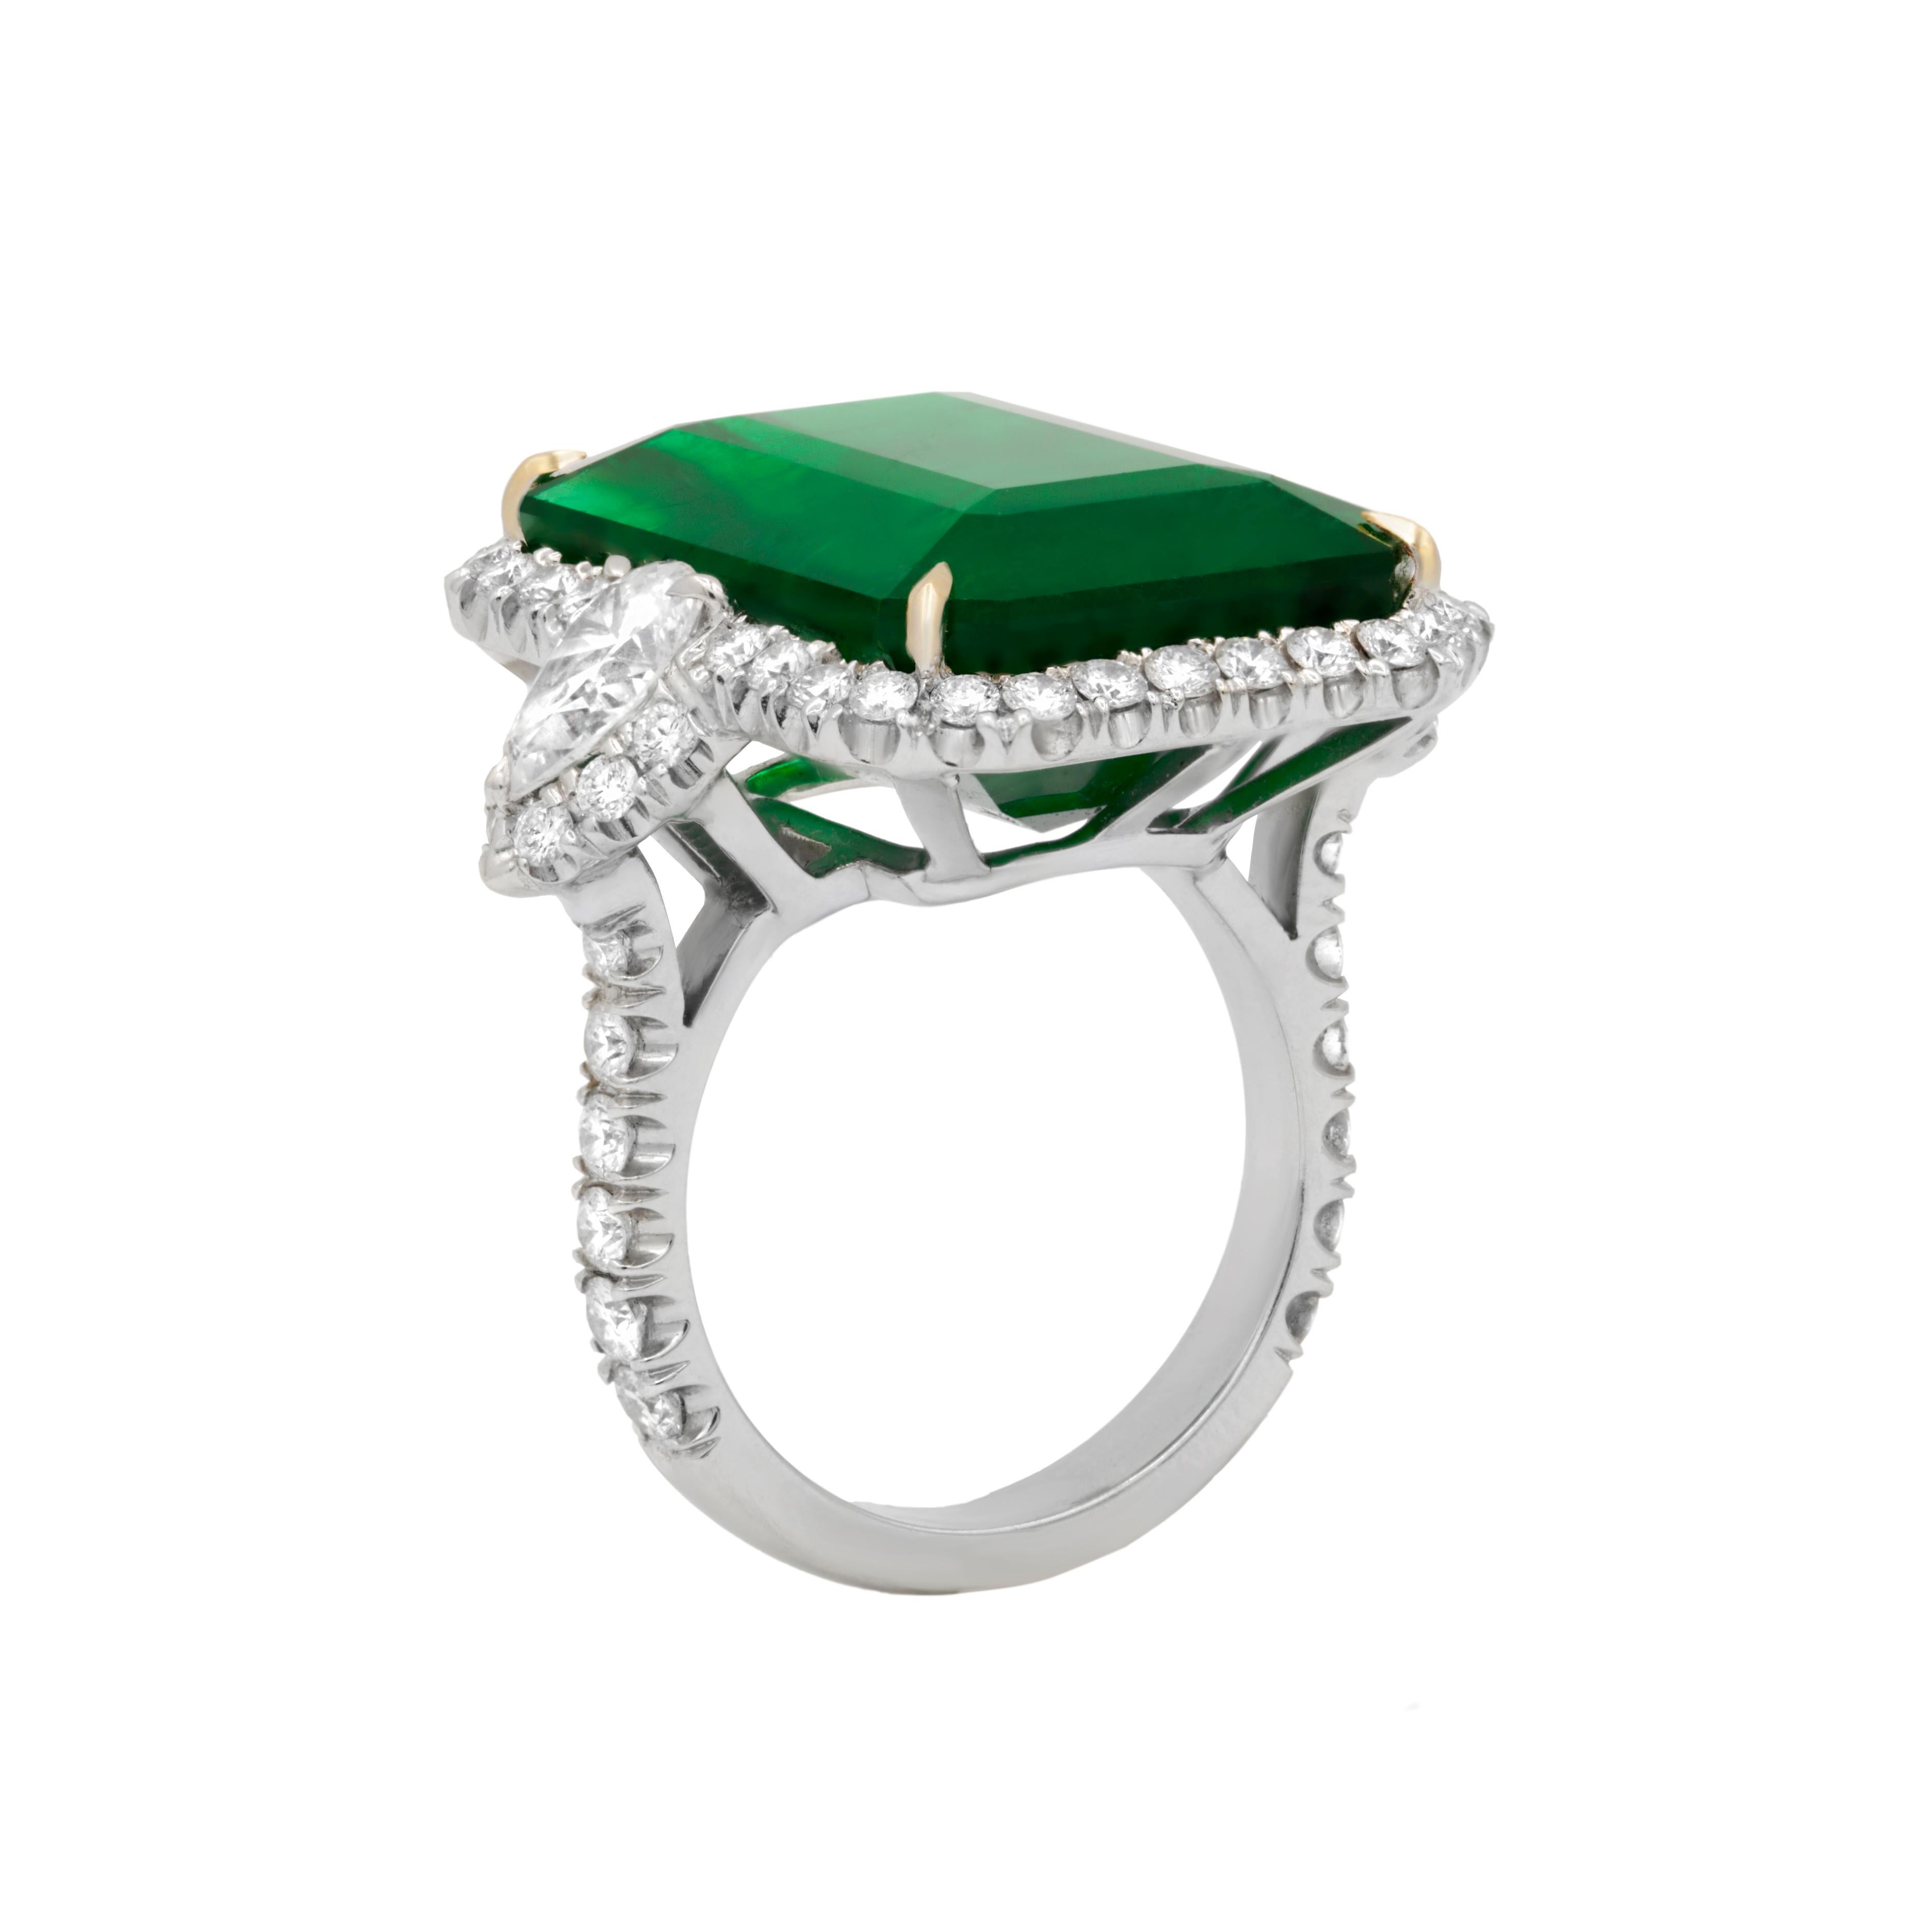 One GIA Certified Green Emerald and Diamond Ring, features 21.10 Carat Green Natural Emerald  (GIA#2155900531), elongated emerald cut shape, certified by GIA Laboratory. Set with 3.40 Carats of diamonds, including two pear shaped diamonds on each